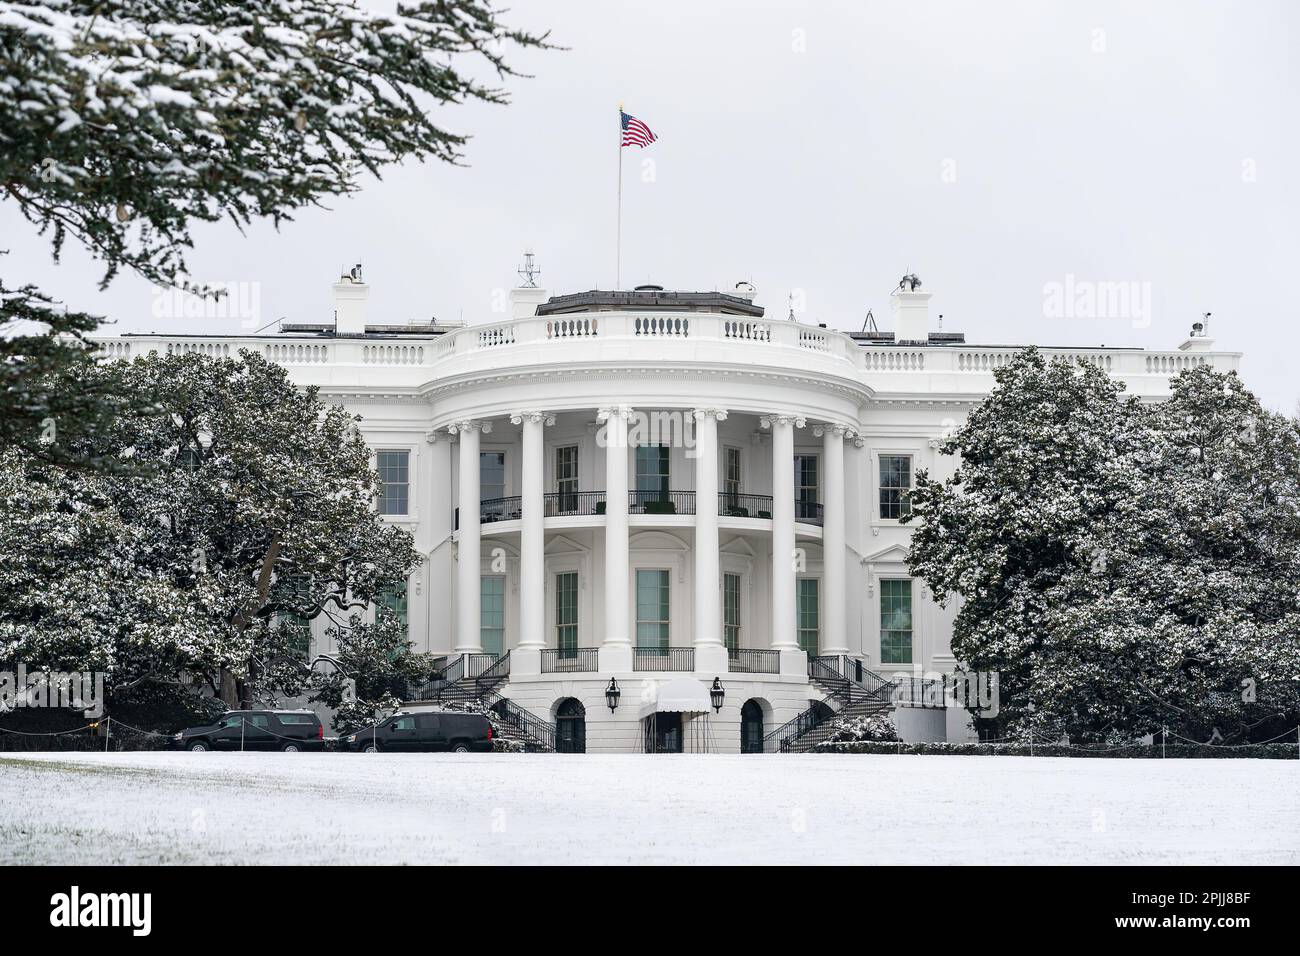 Snow covers the South Lawn of the White House Monday, Feb. 1, 2021. (Official White House Photo by Adam Schultz) Stock Photo